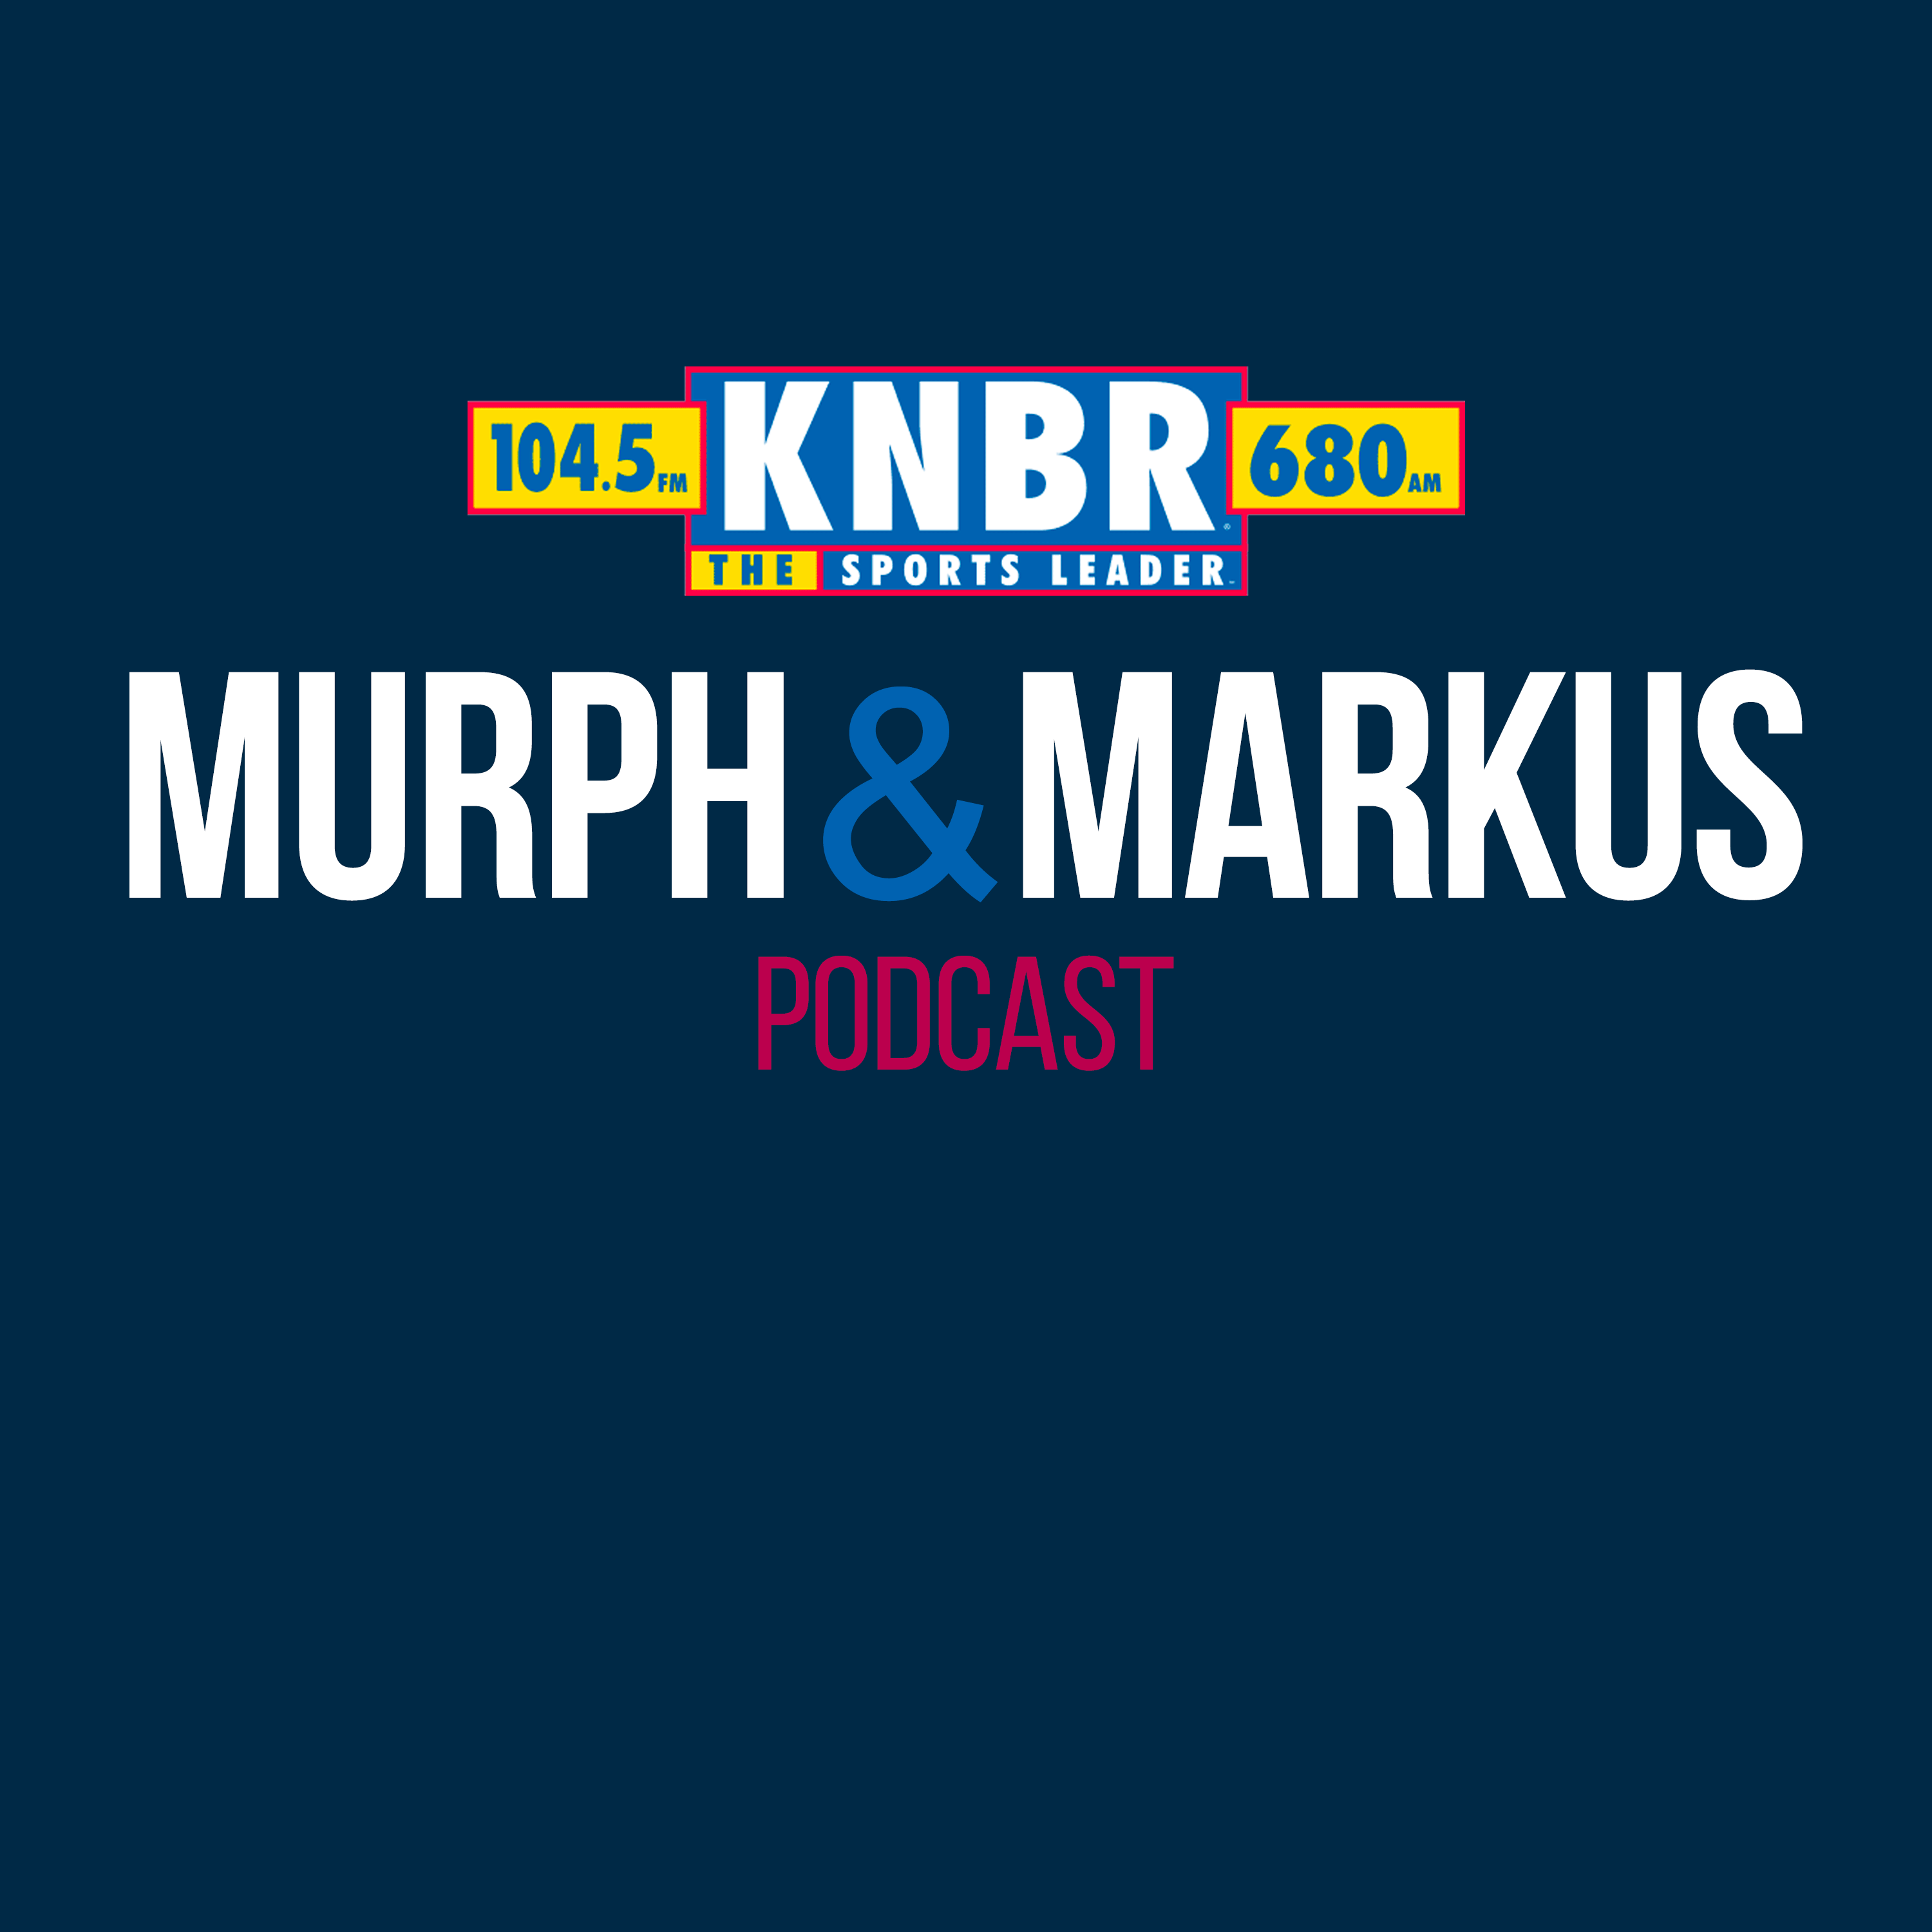 4-15 Hour 3: Murph and Markus continue their discussion on the Warriors-Kings play in matchup